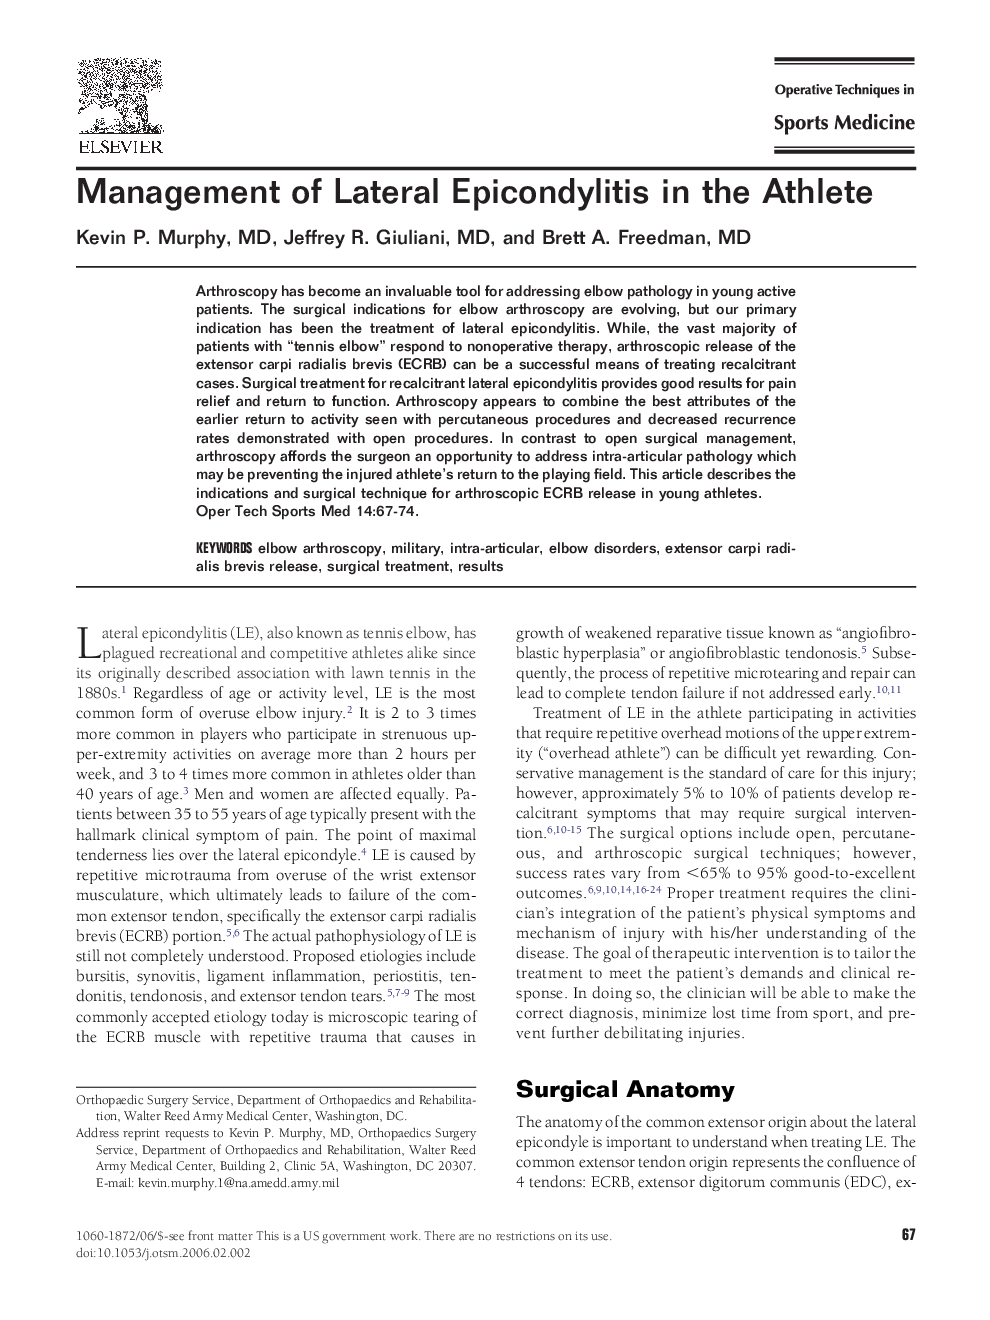 Management of Lateral Epicondylitis in the Athlete